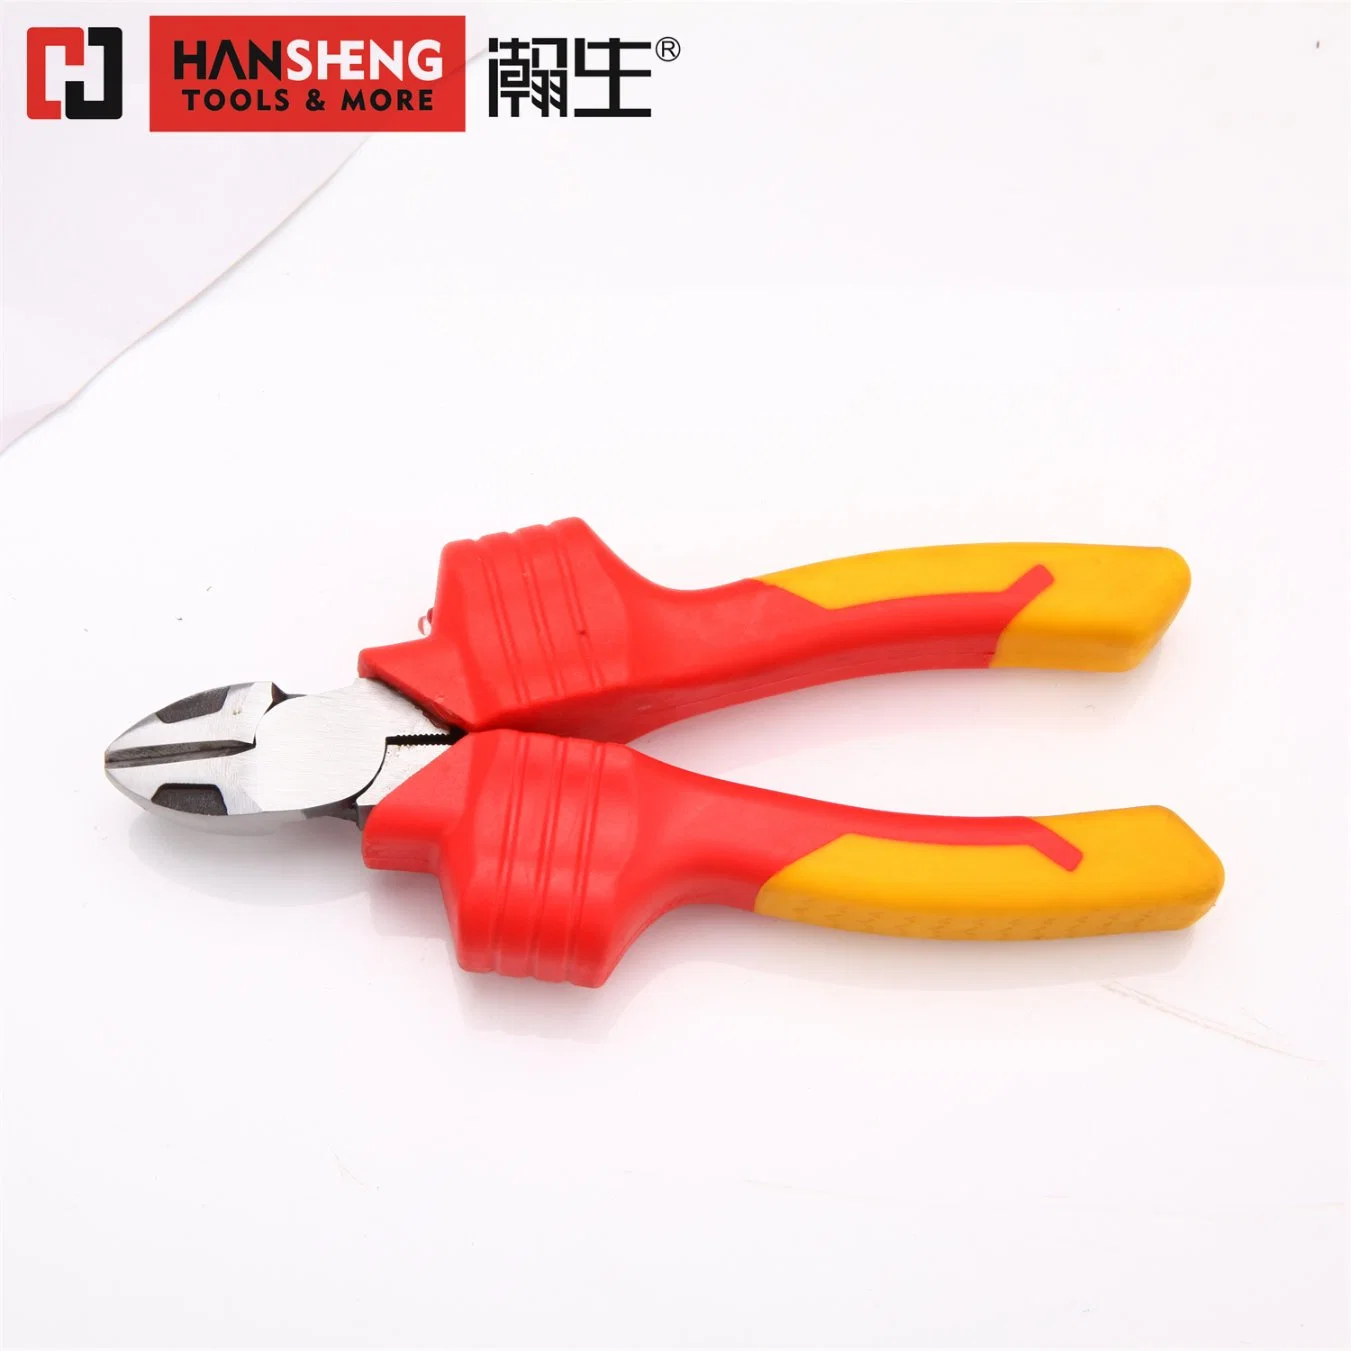 VDE Combination Pliers, Hand Tools, Hardware Tools, Cutting Tools, with 1000V Handle, Professional Hand Tool, Pliers, Insulating Tool